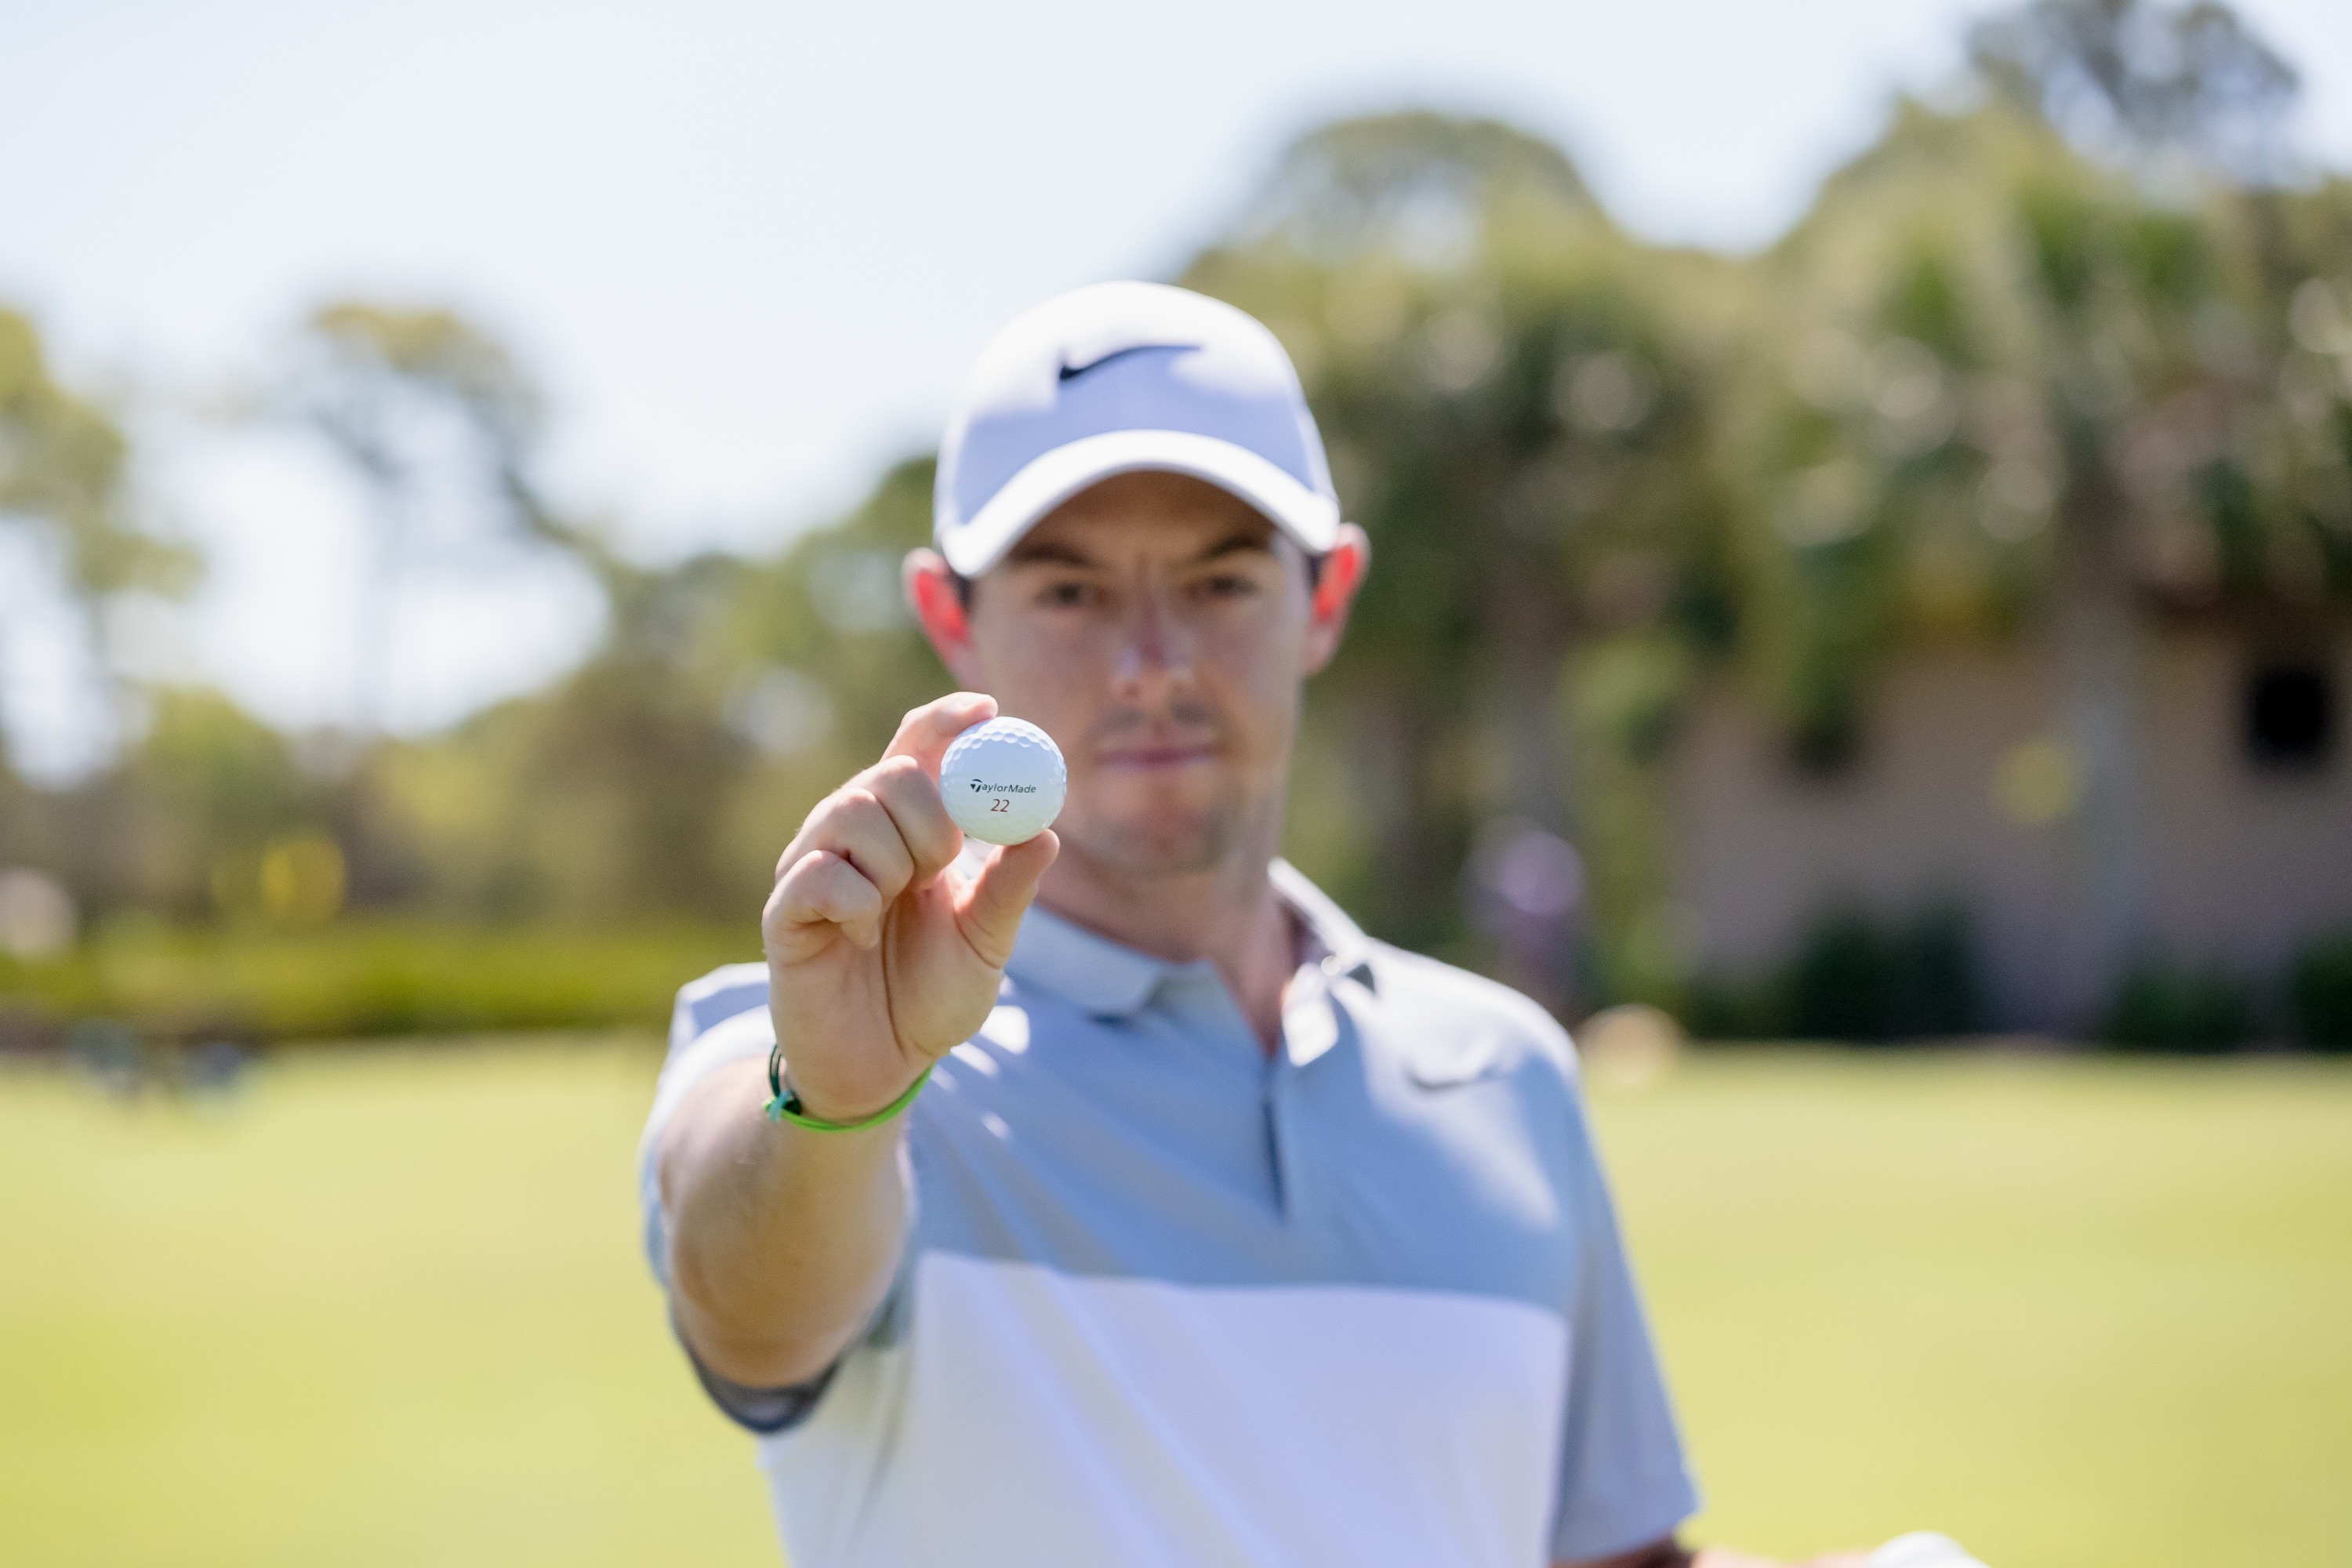 Page 2: Why Rory chose the TP5x golf ball